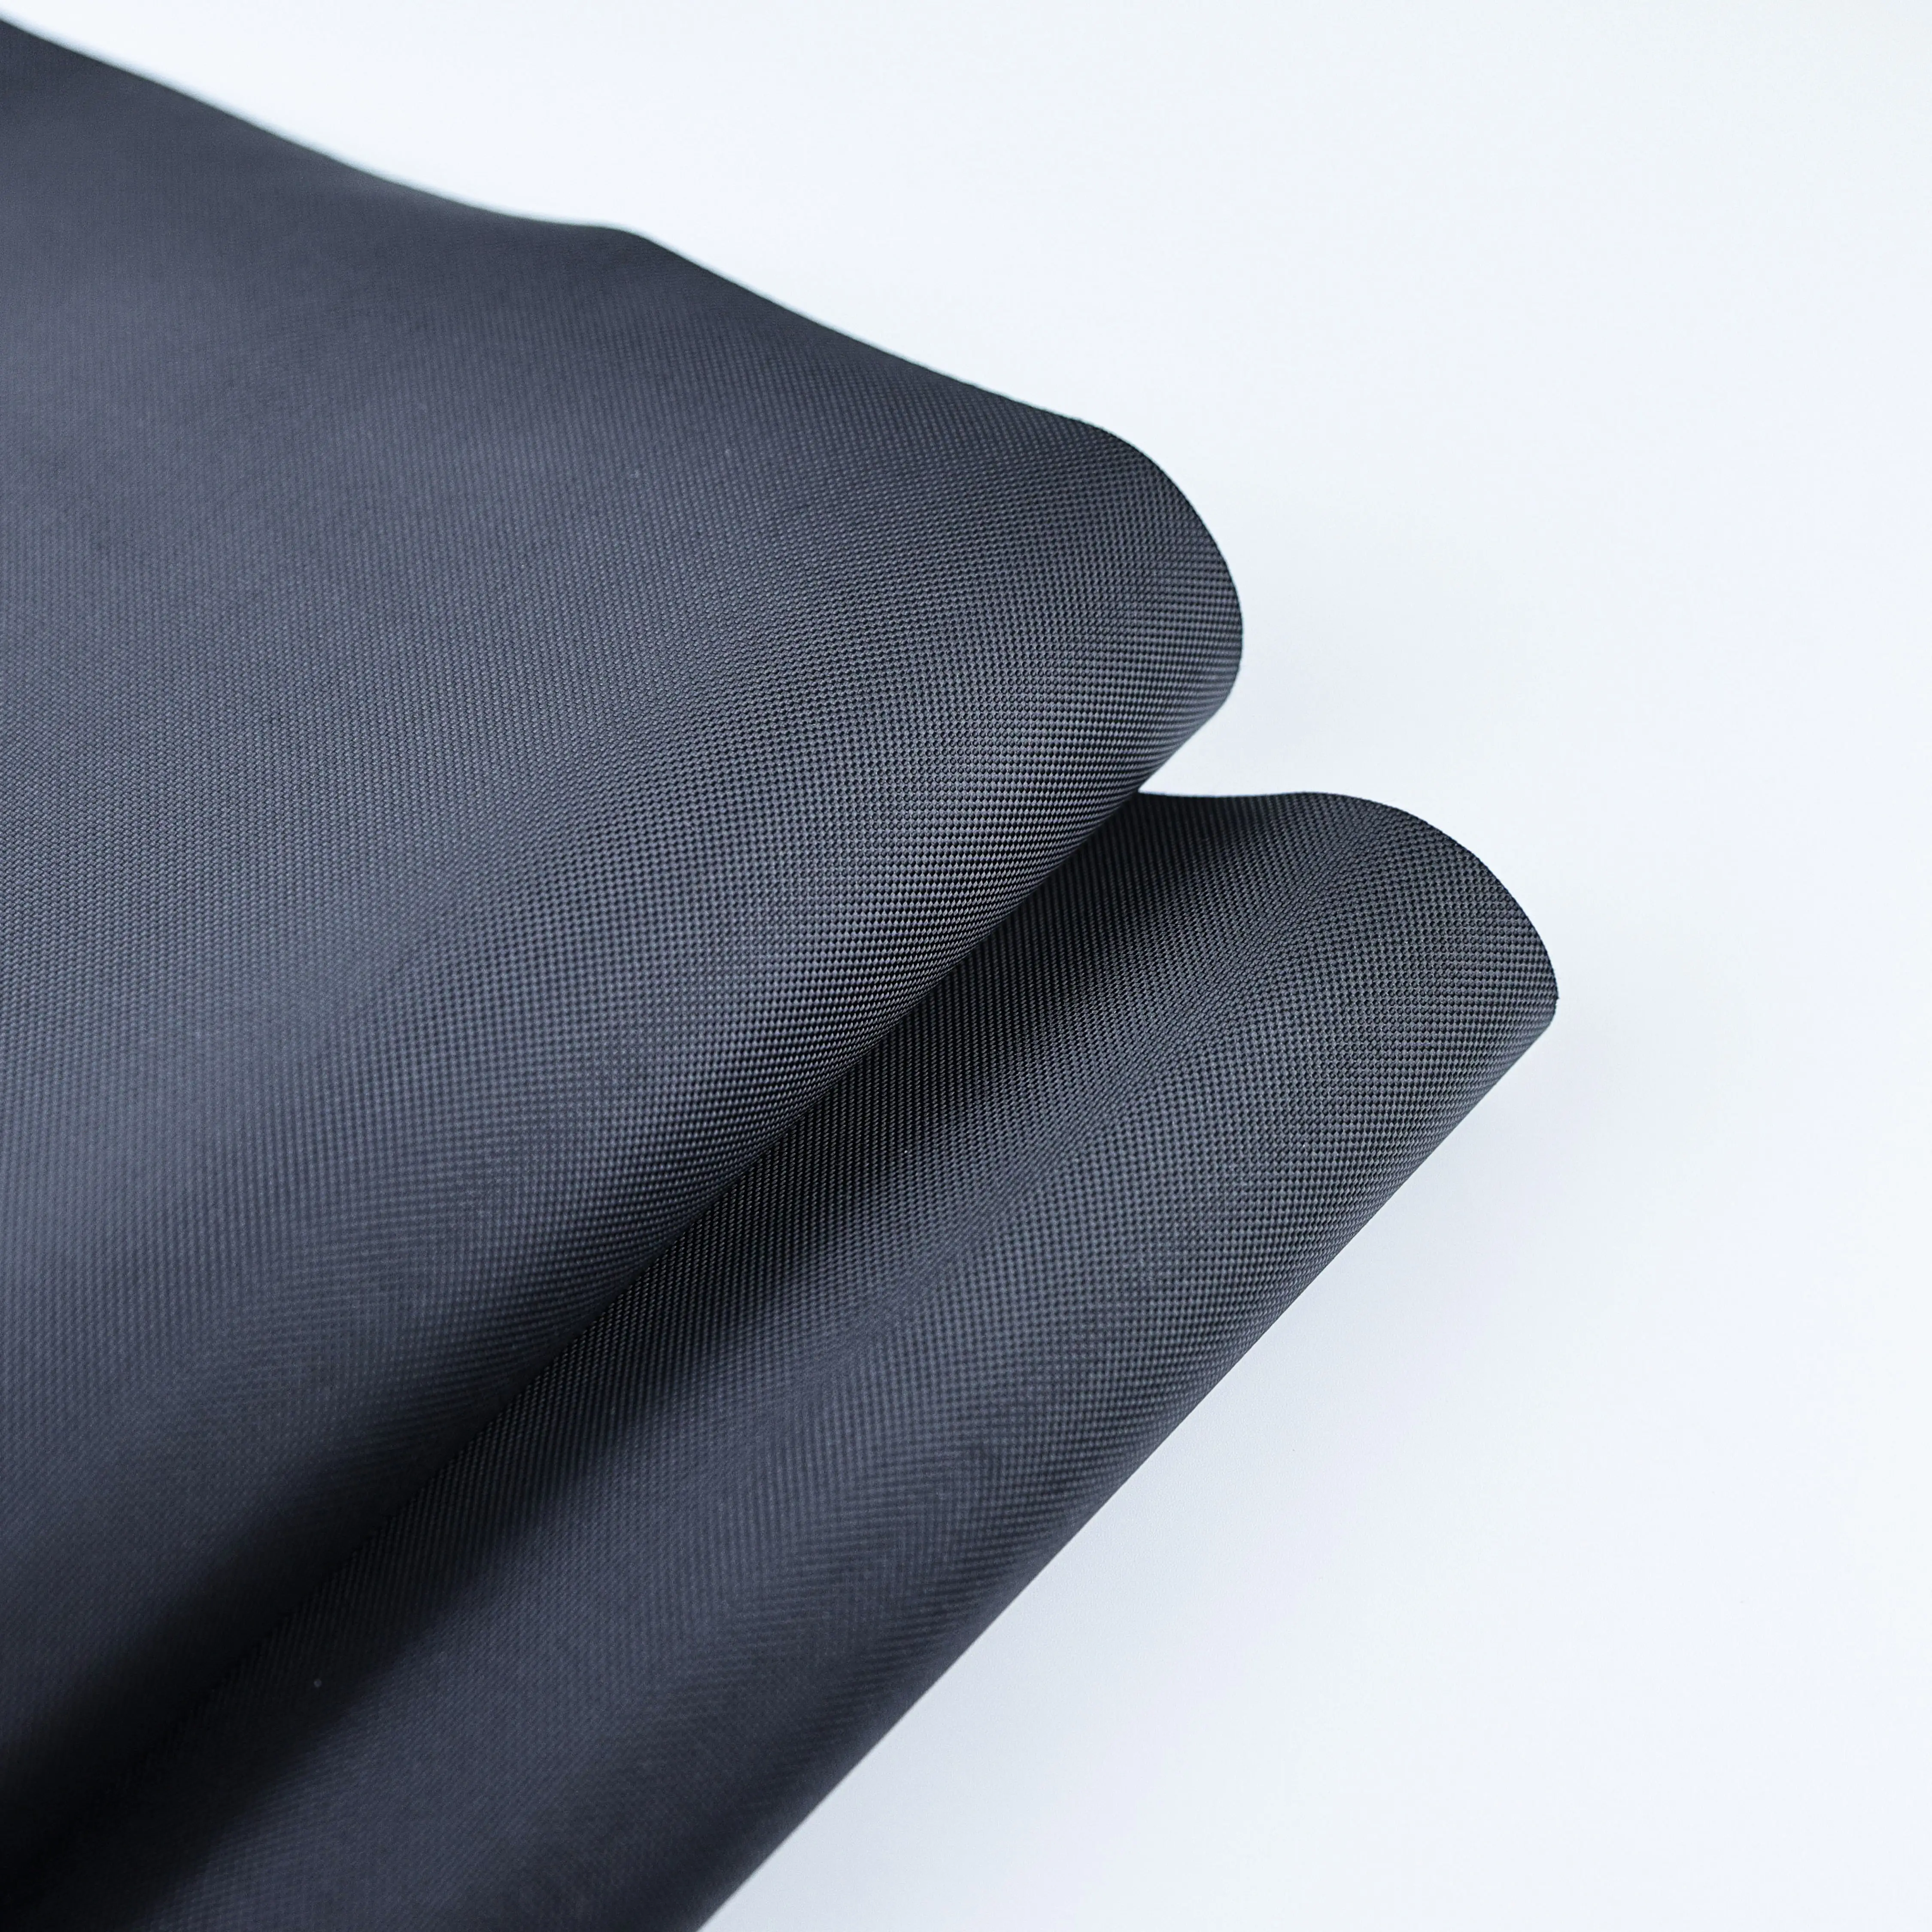 Manufacture 600D Oxford Fabric Silver Coated Oxford Fabric Polyester Oxford Fabric